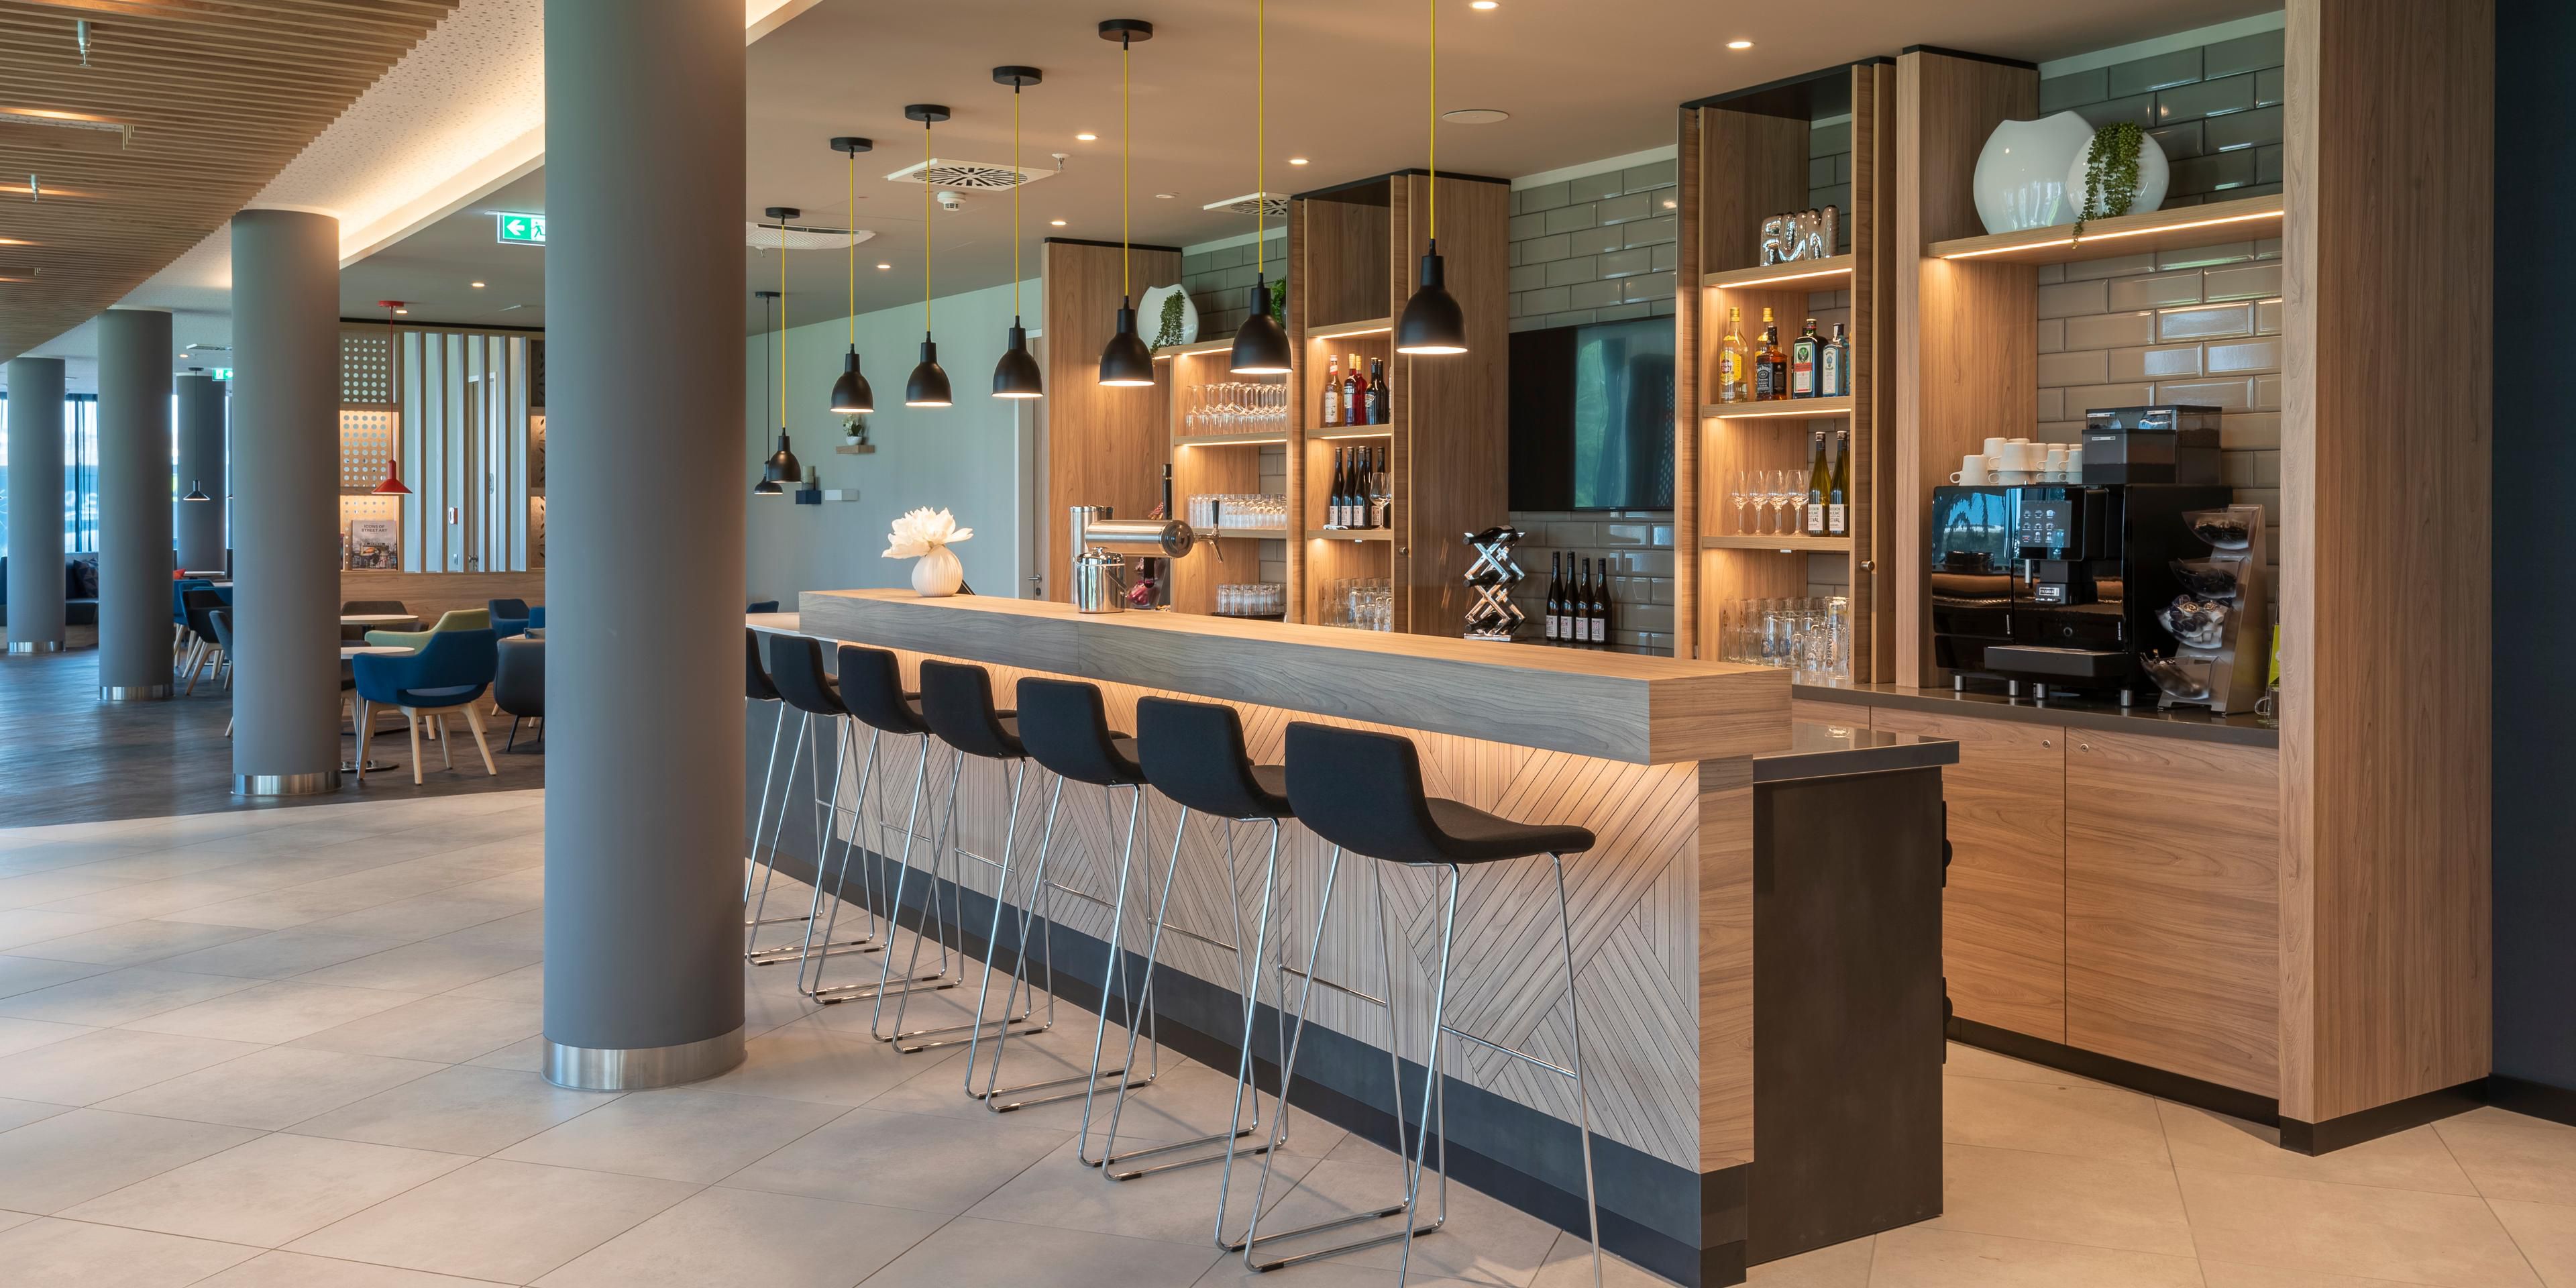 Take a relaxing break after exploring Dusseldorf with drinks at our casual hotel bar. Enjoy cocktails, wine, beer, coffee, fizzy drinks, delicious snacks, and light meals. Meet friends and colleagues for a pint of German beer and enjoy socialising at the bar and lounge.